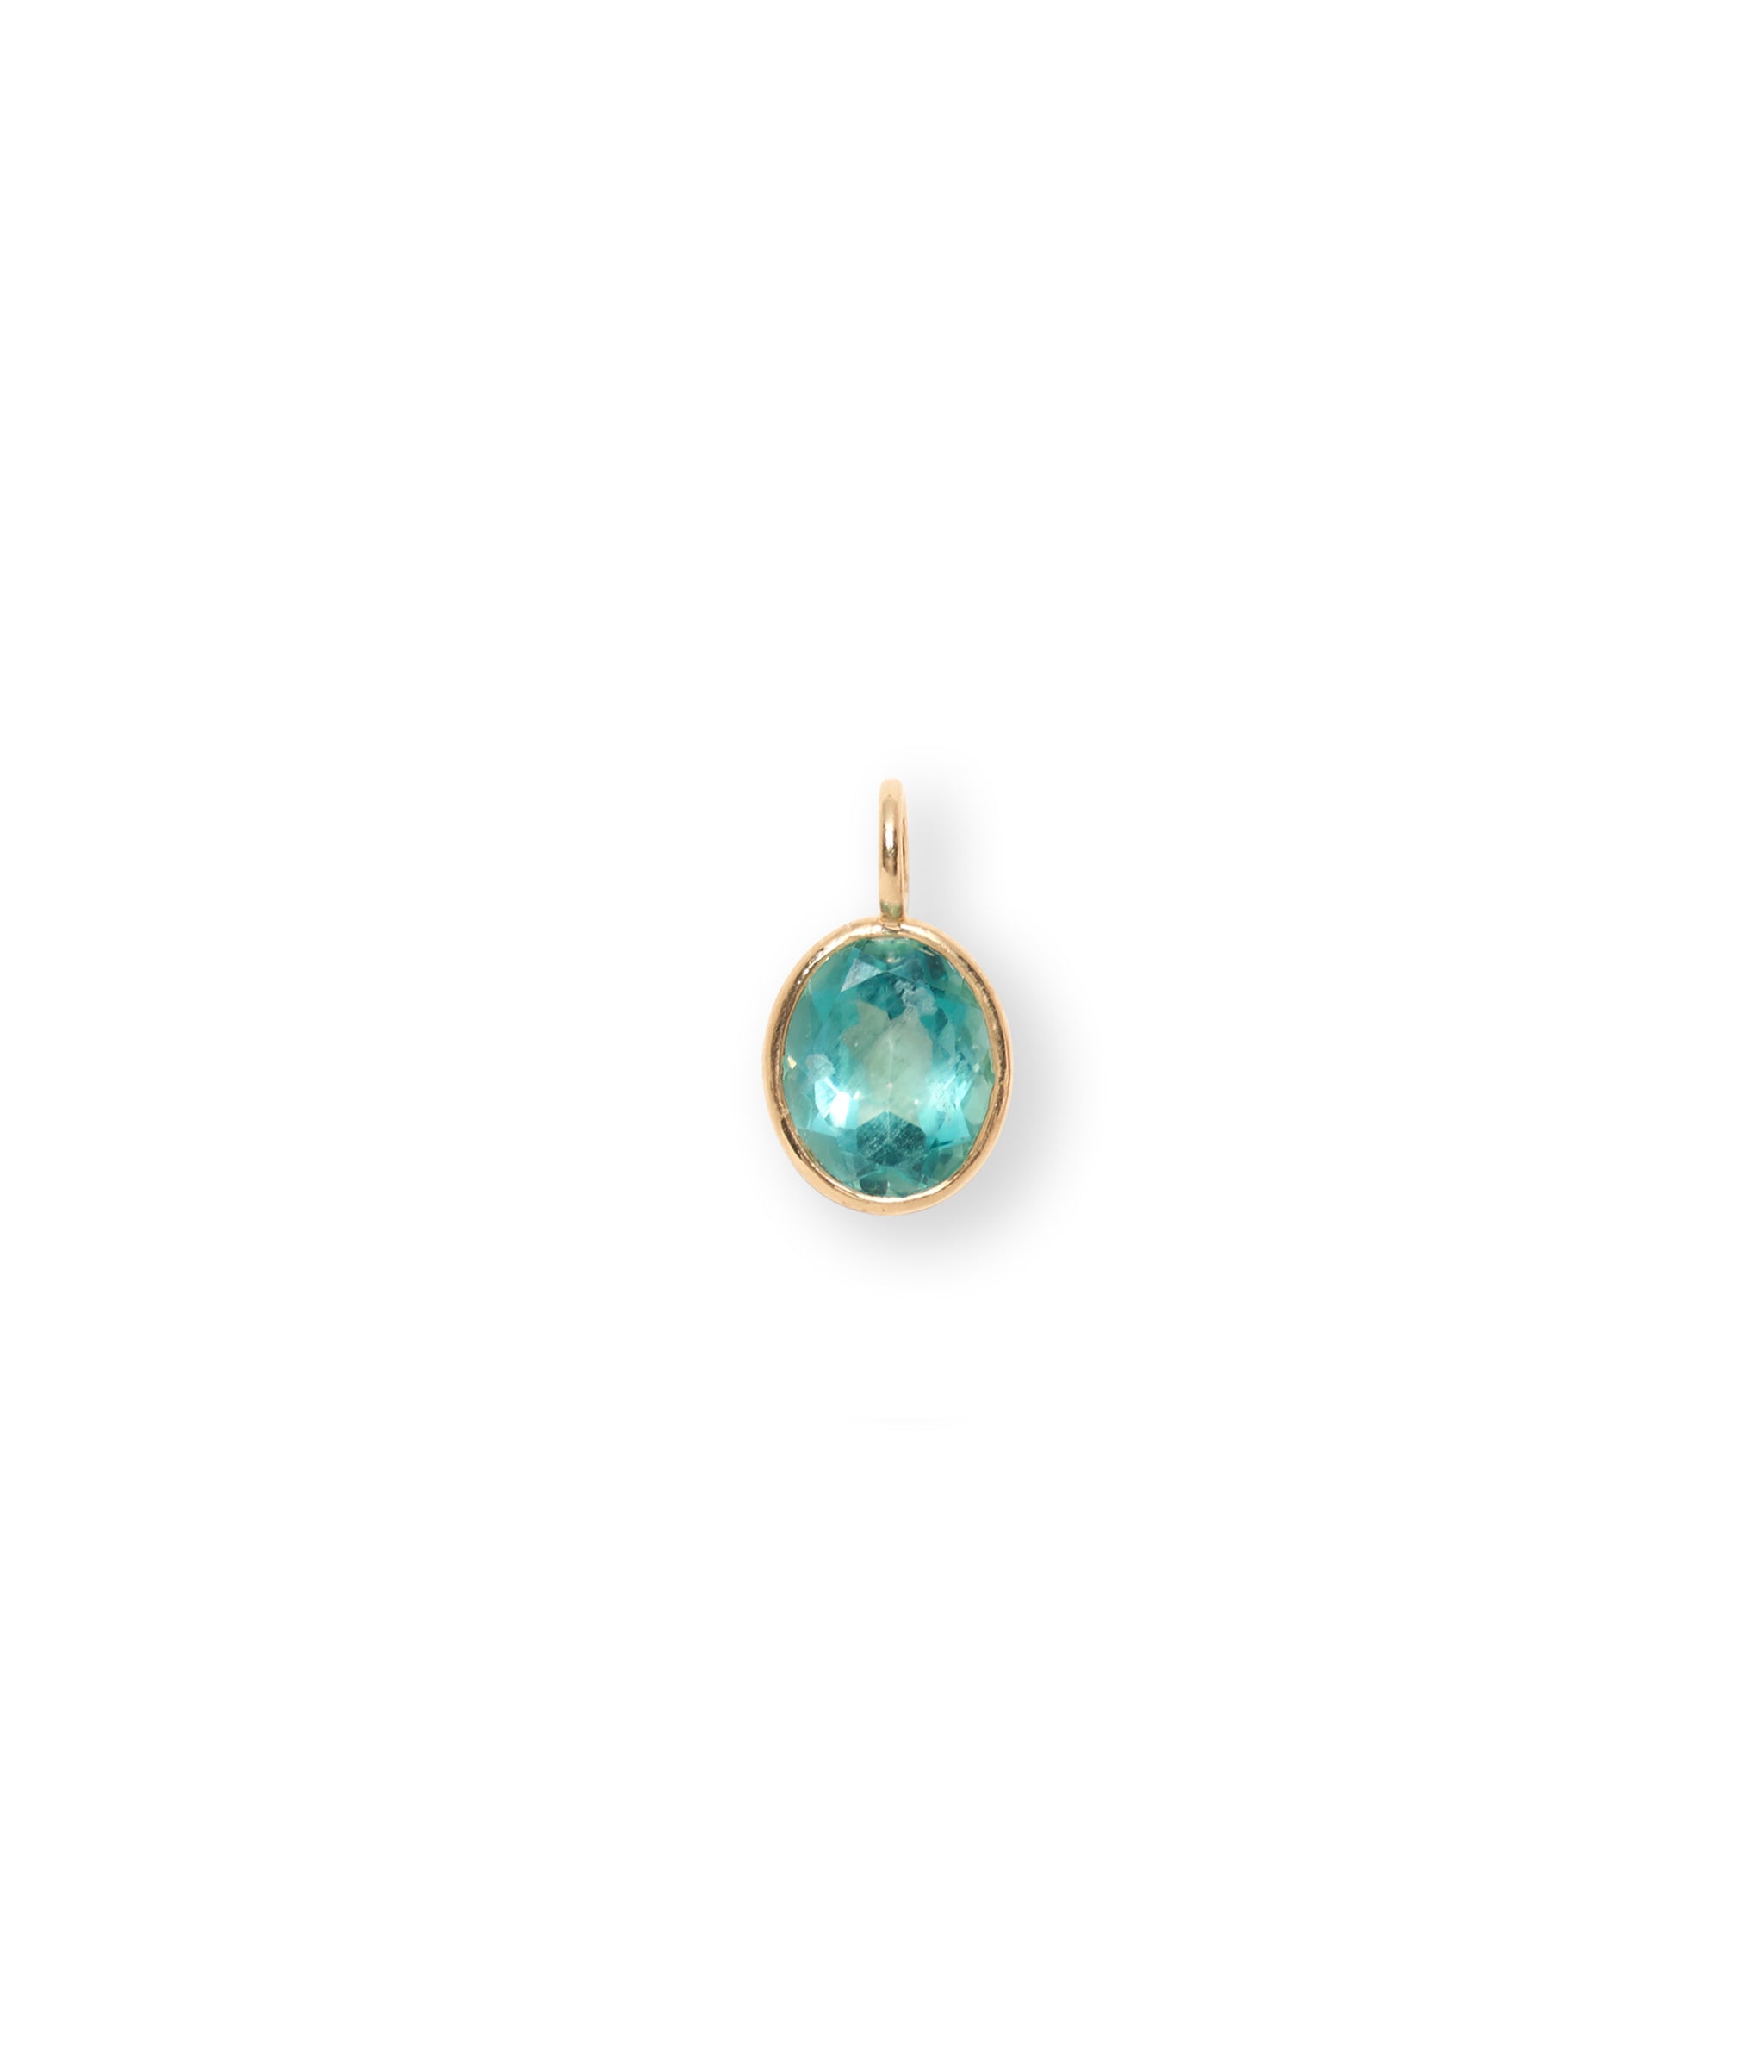 Singular Oval 14k Gold Necklace Charm in Green Topaz. Green Topaz Oval with 14k gold.